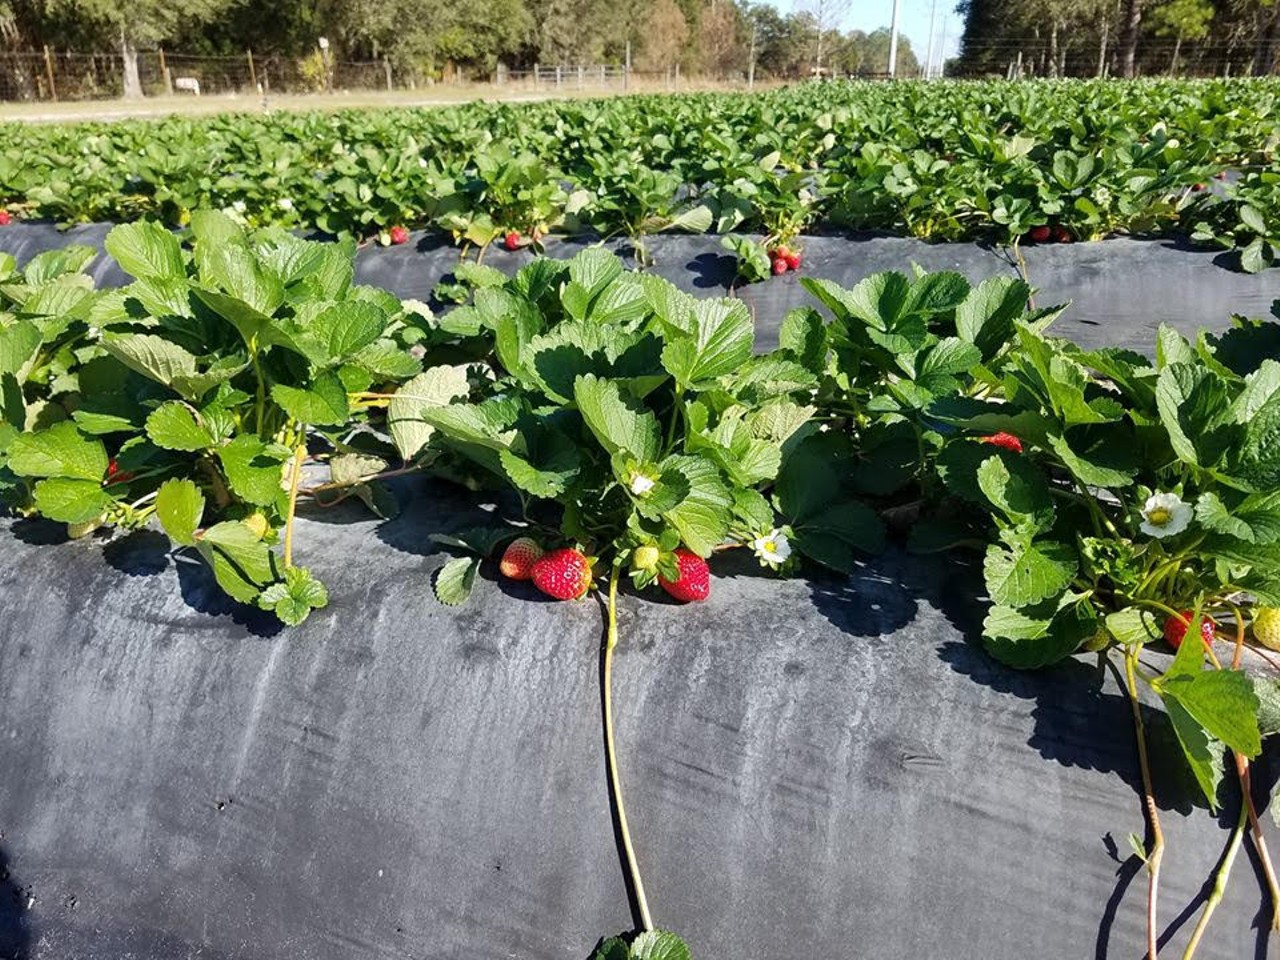 
J.G. Ranch
17200 Wisconsin Rd., Brooksville, 352-799-0556
Located on Florida&#146;s west coast, this farm has strawberry picking through February. They also produce their own free-range eggs and sell local honey as well as variety of fresh vegetables.
Photo via J.G. Ranch/Facebook